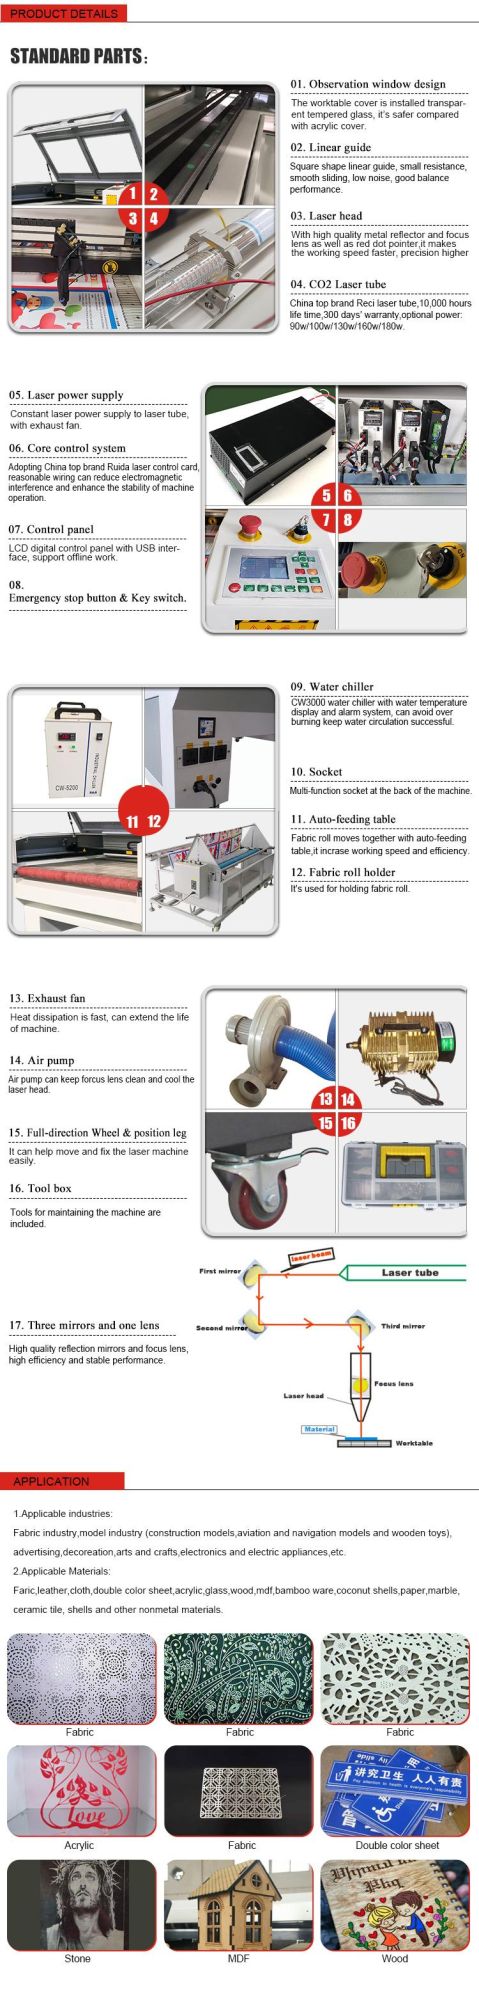 Large Format Laser Cutter for Nonmetal Textile Fabric Cutter 1630